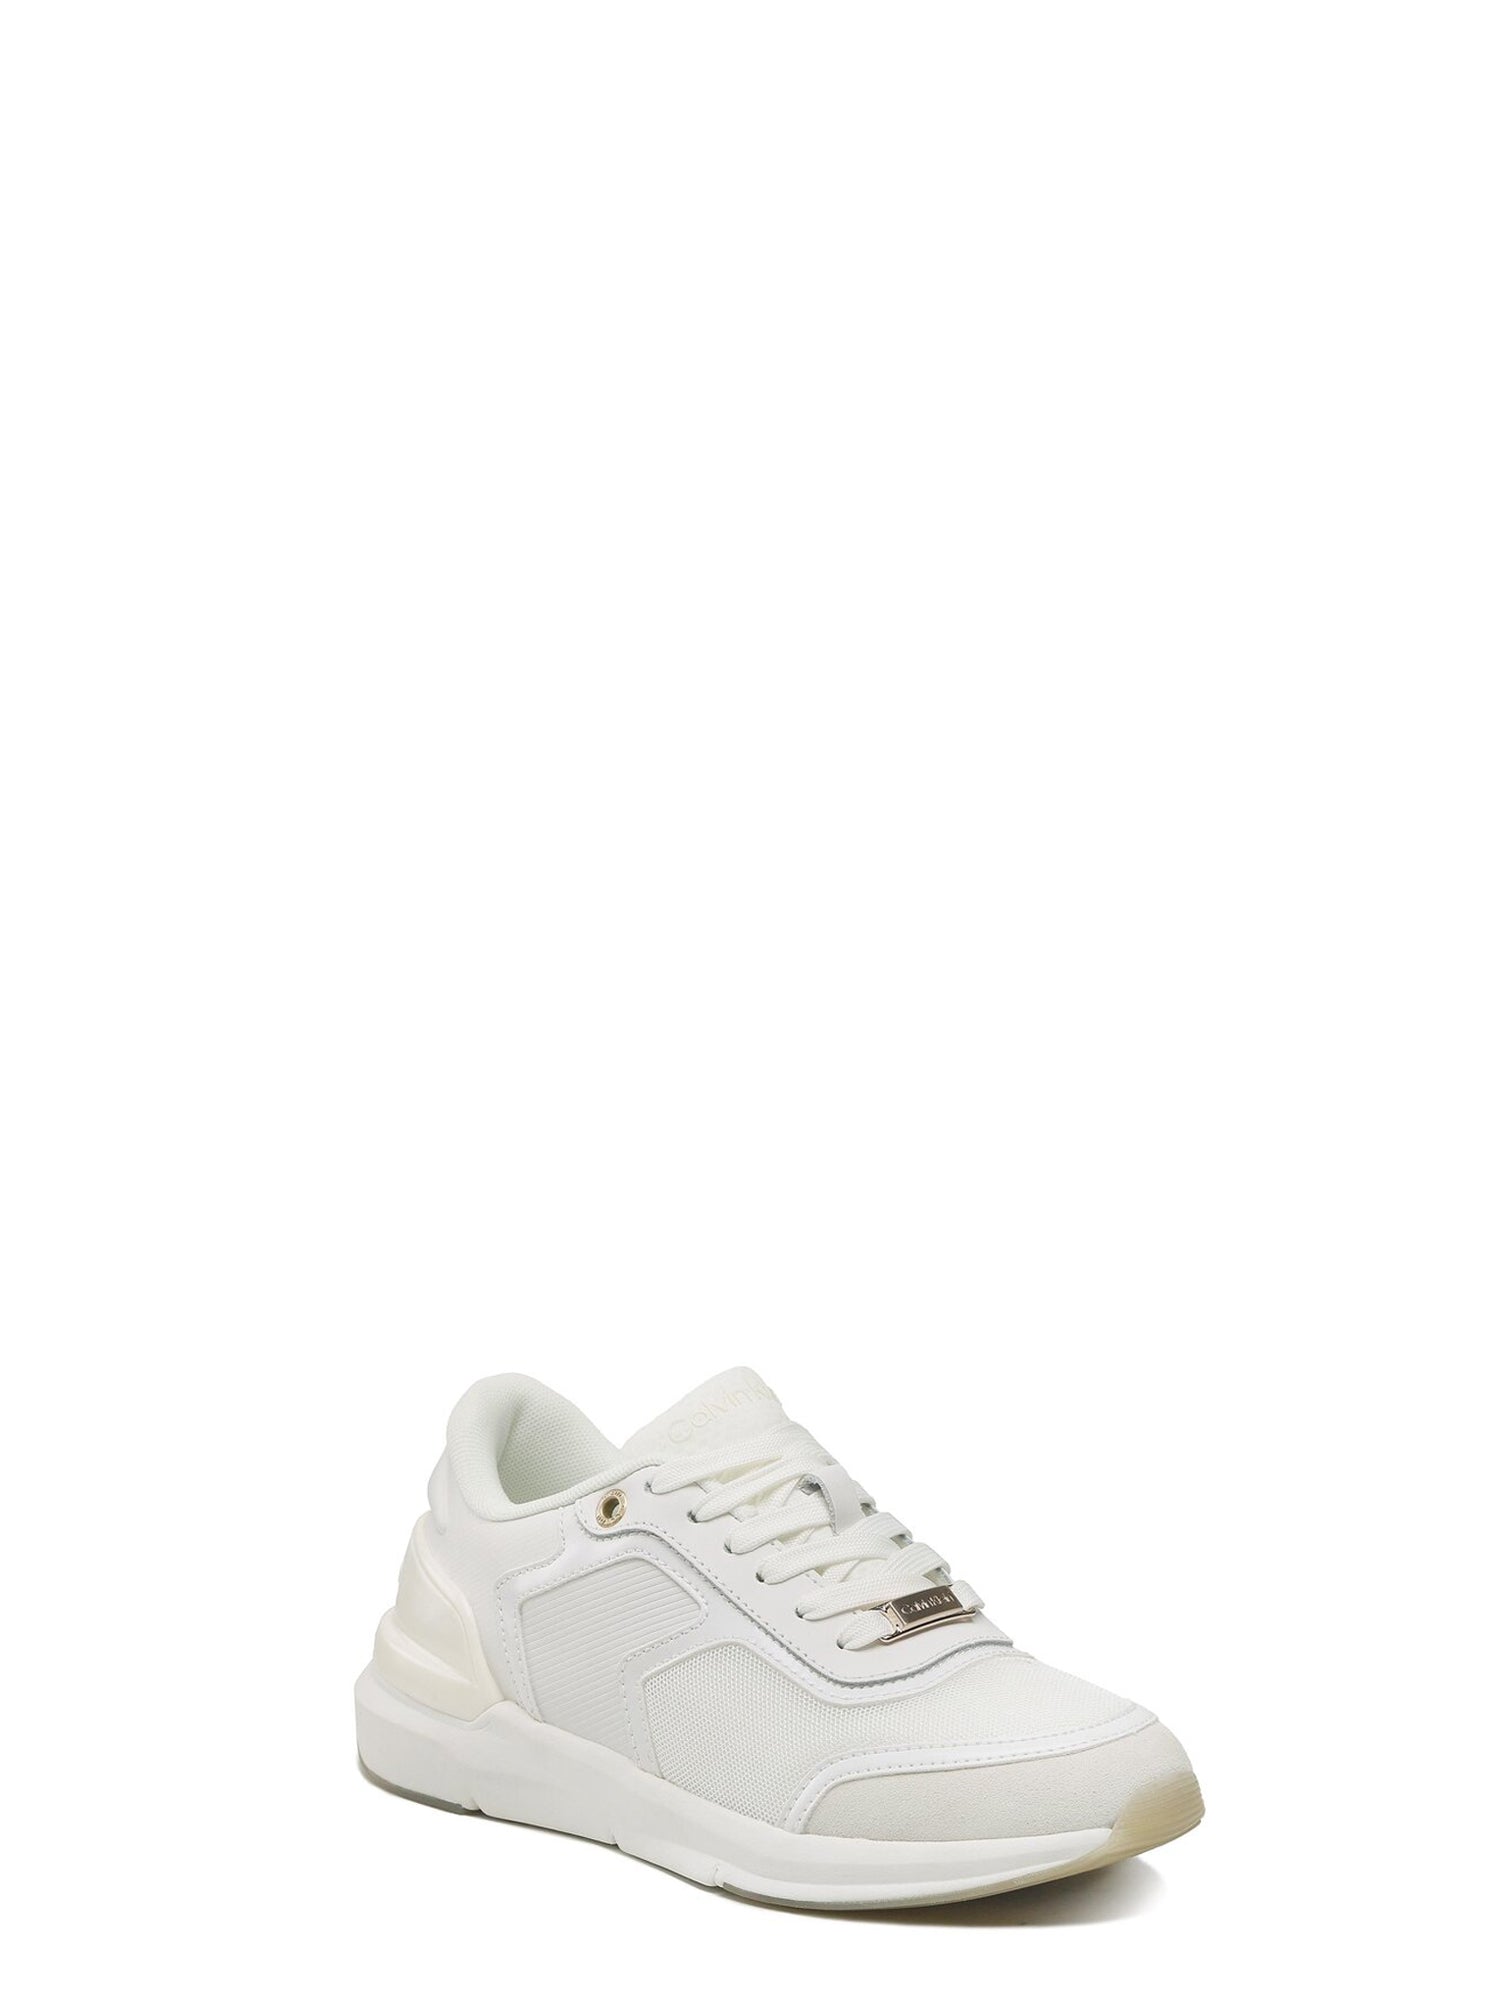 CALVIN KLEIN SHOES FLEXI RUNNER LACE UP BIANCO